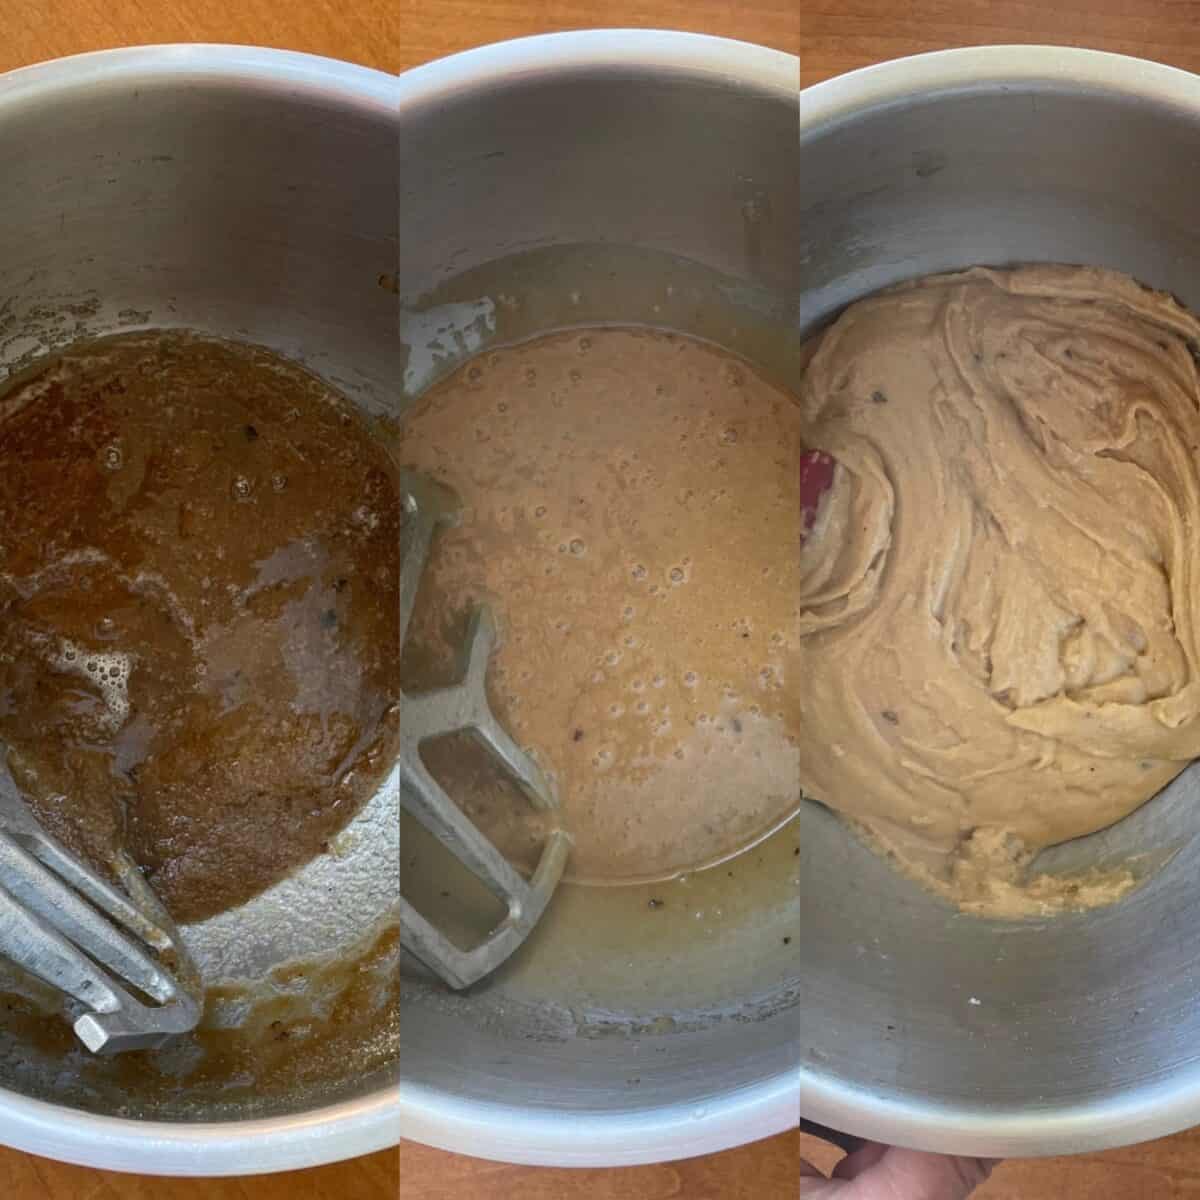 three panels showing each step in making the cherry blondie batter.